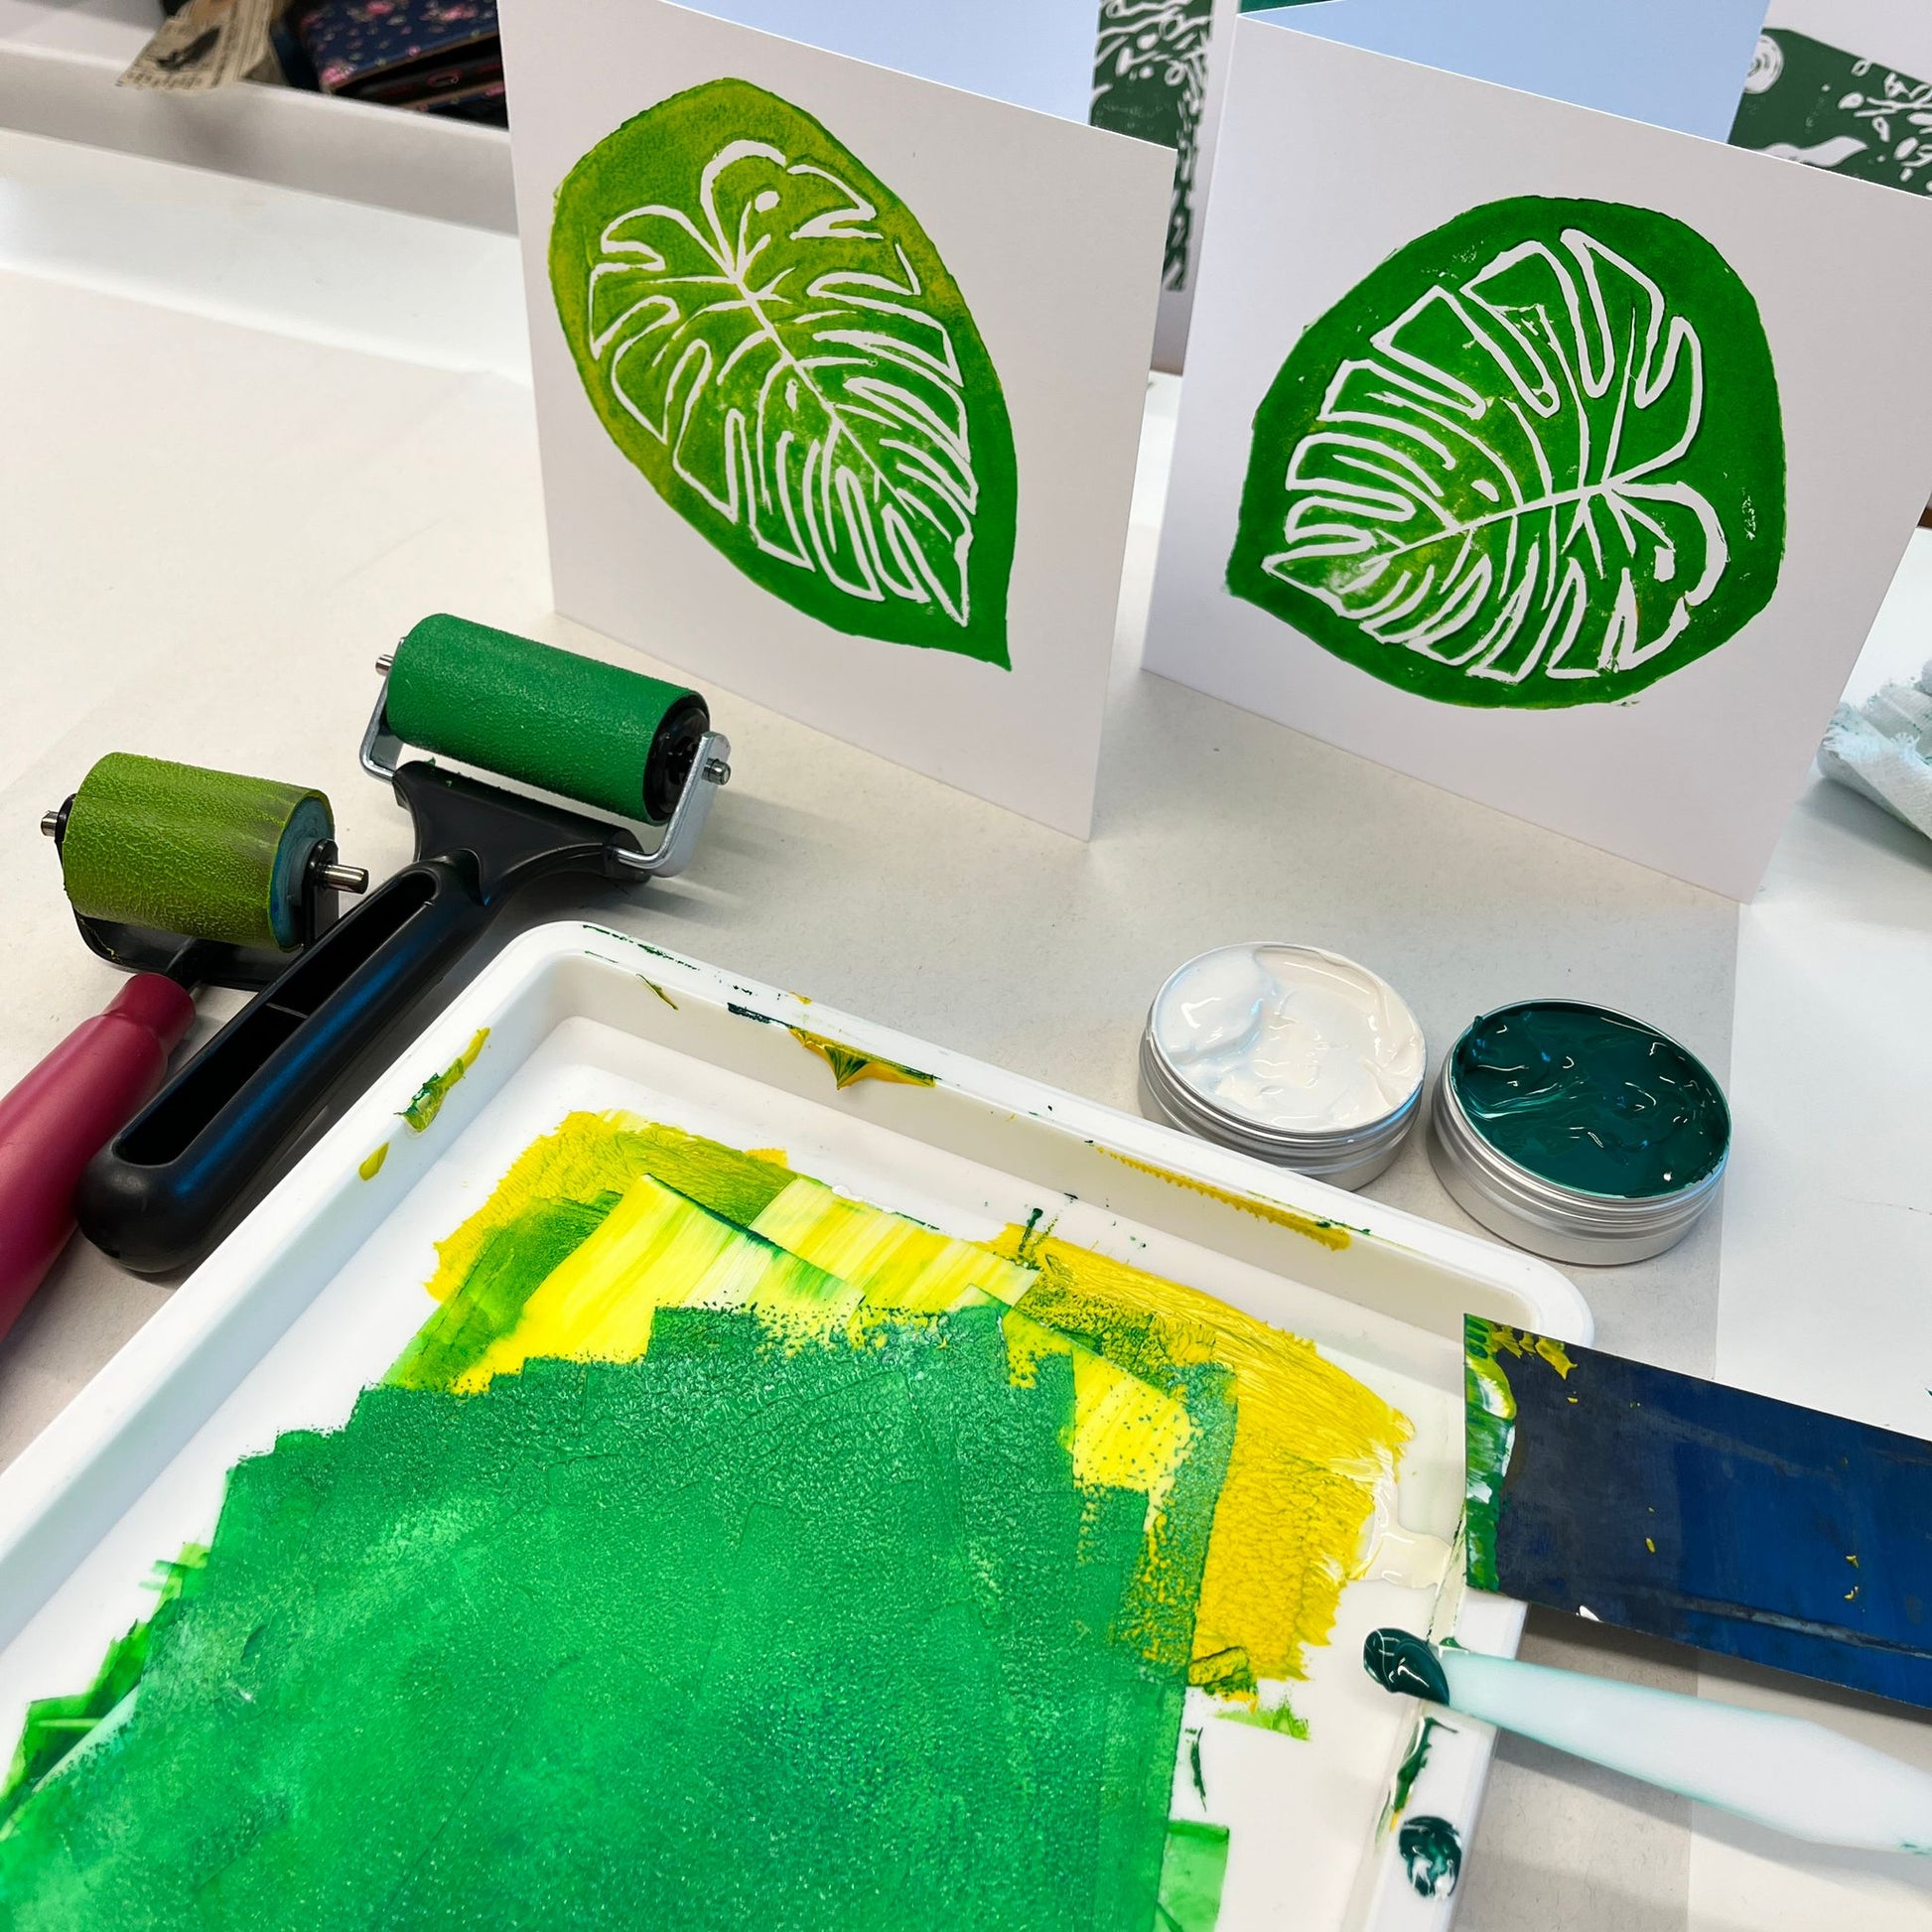 printing with green shade to make greeting cards